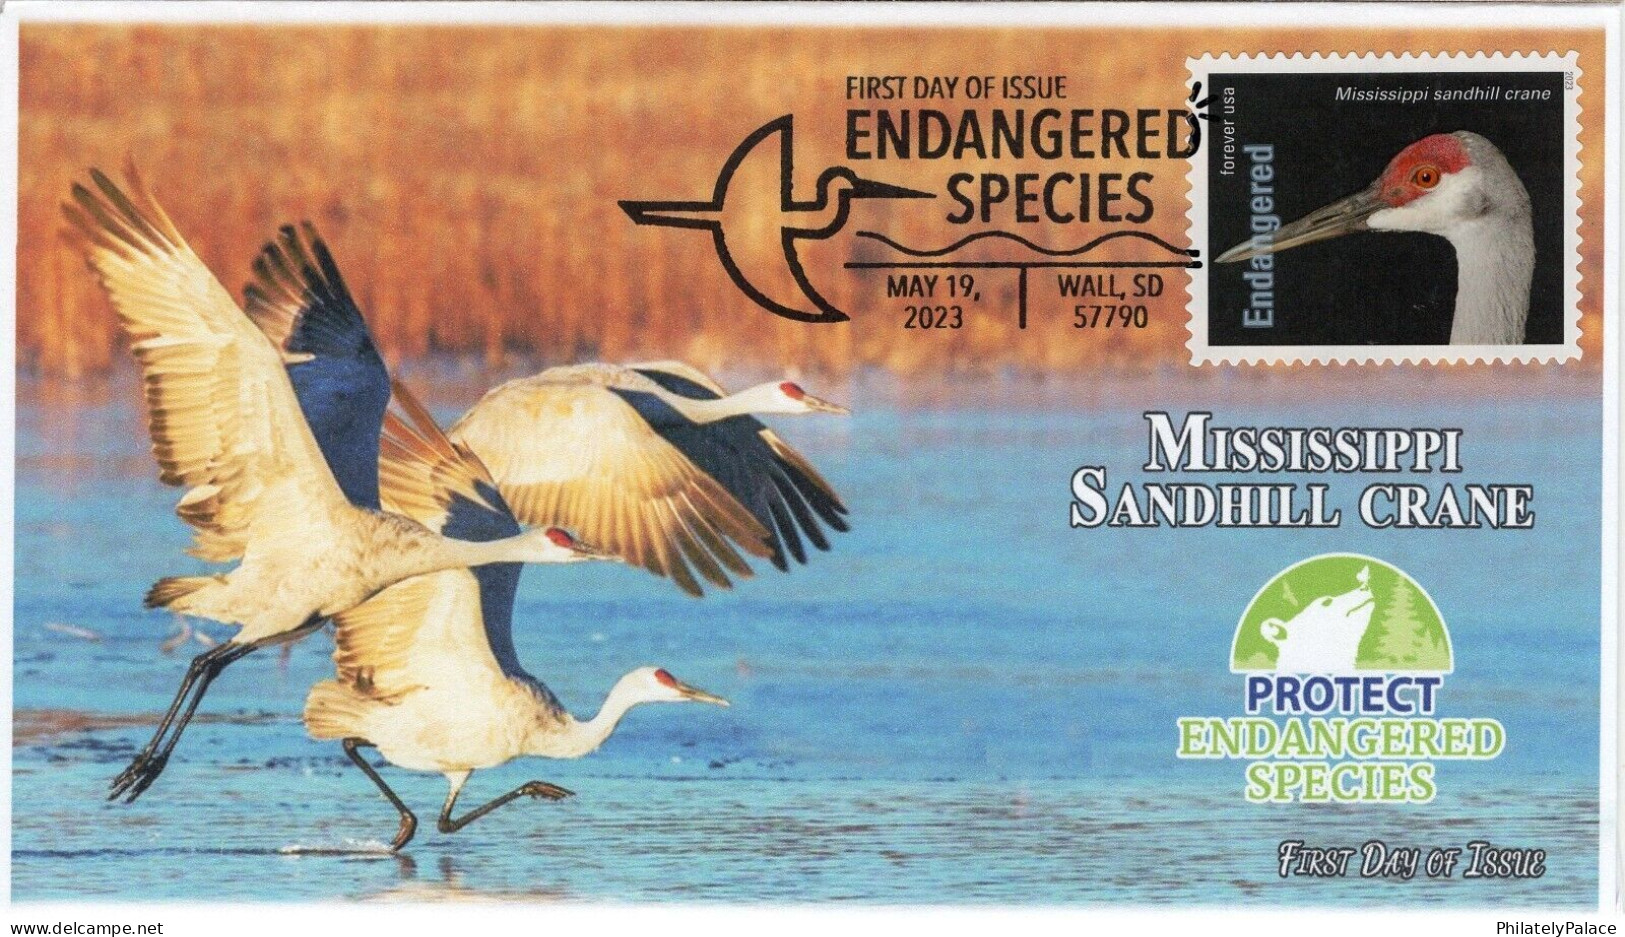 USA 2023 Mississippi Sandhill Crane, River, Endangered Species, Bird,Pictorial Postmark, FDC Cover (**) - Covers & Documents